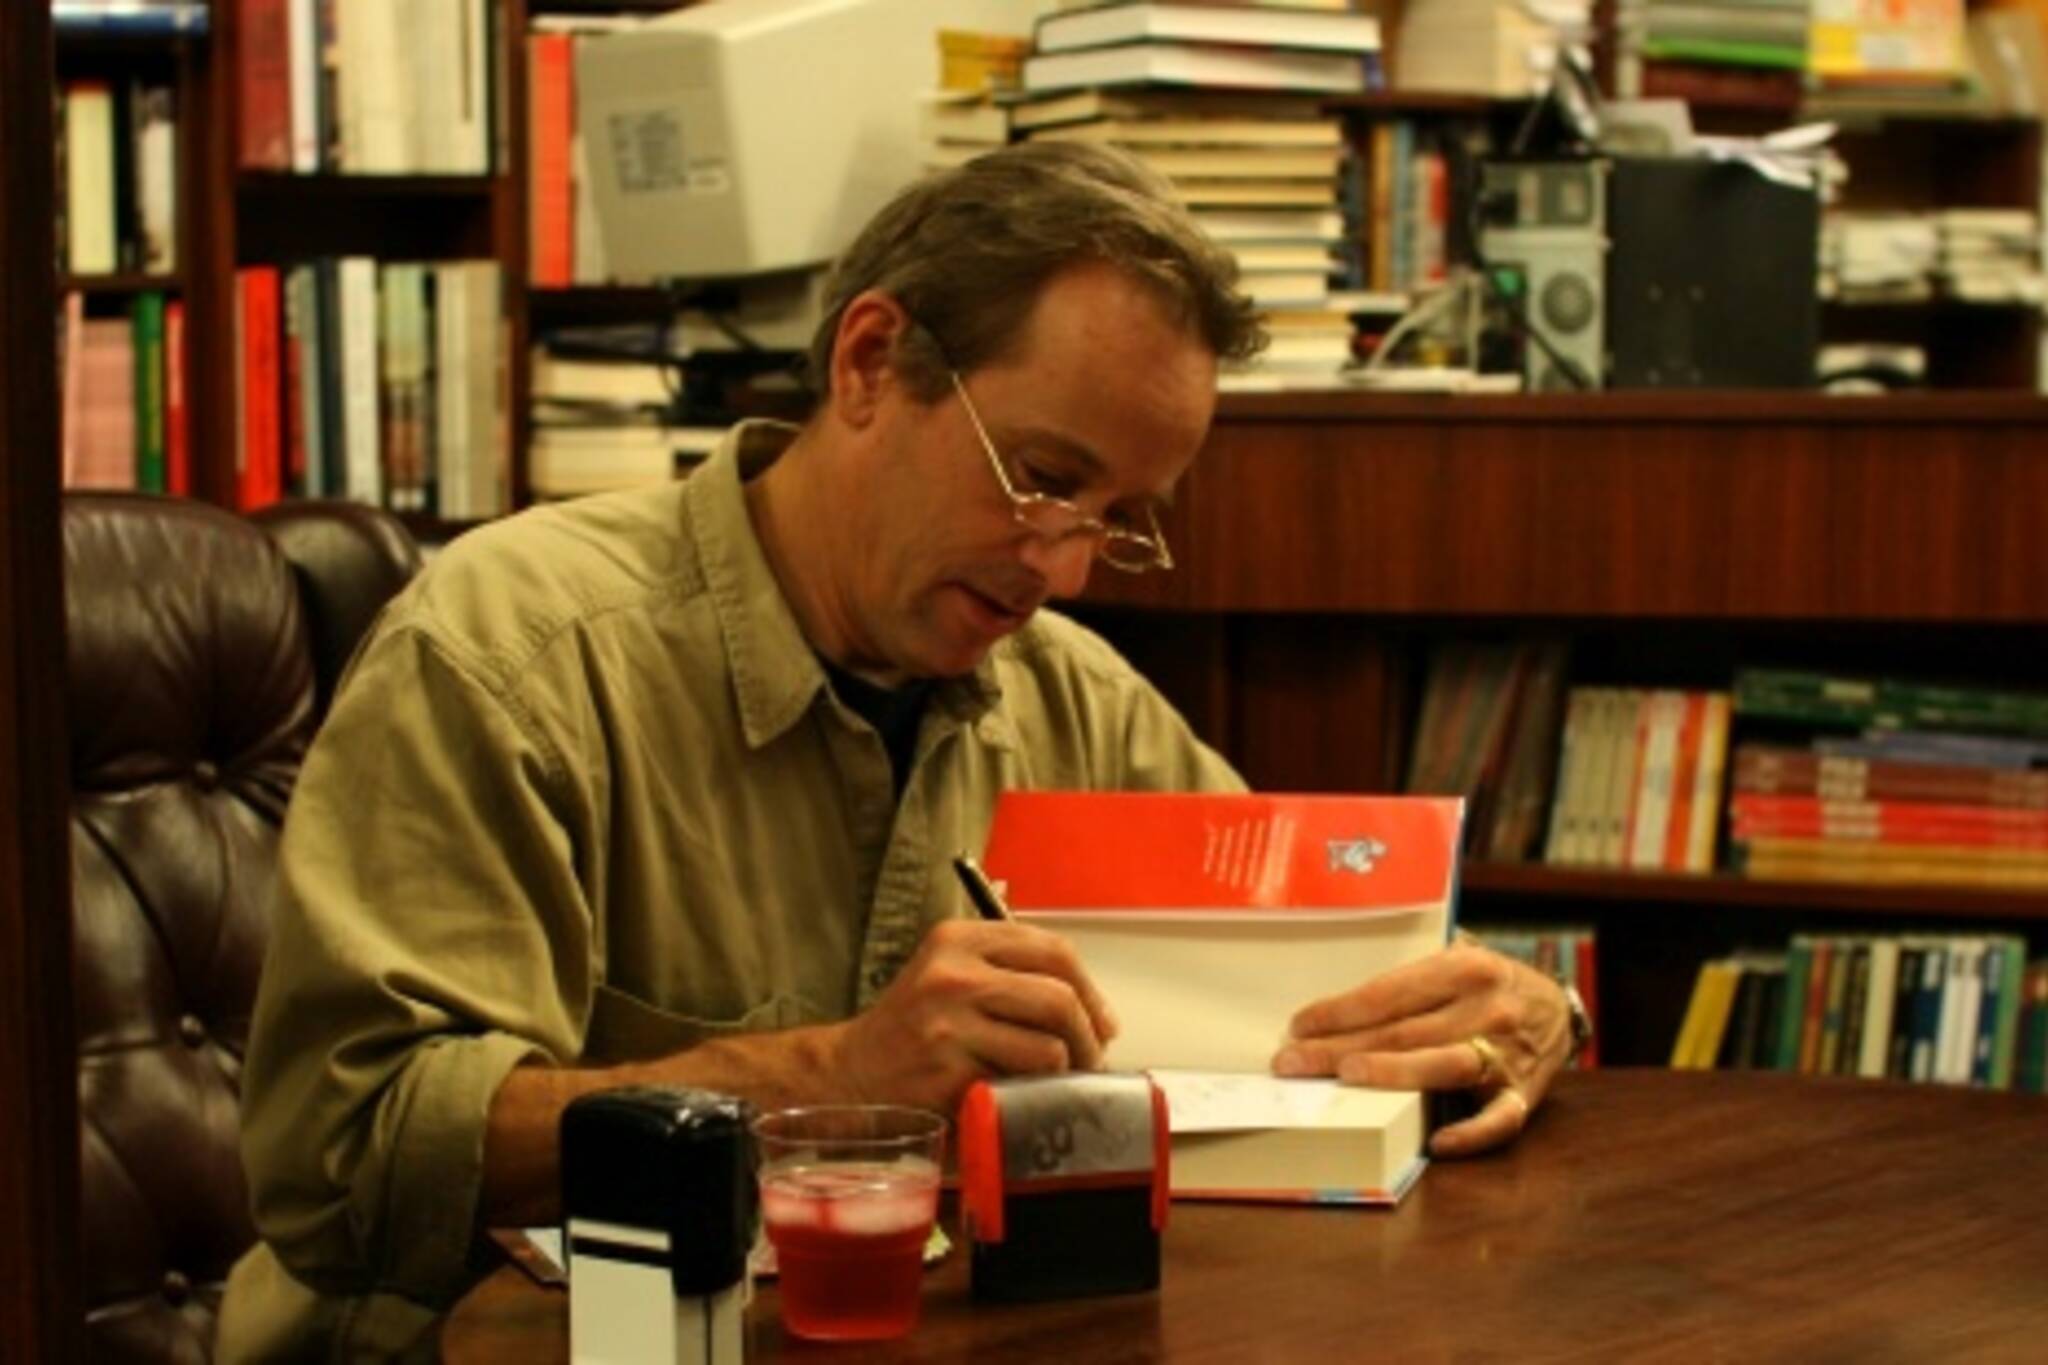 An utterly charming Jasper Fforde signs books at The Sleuth